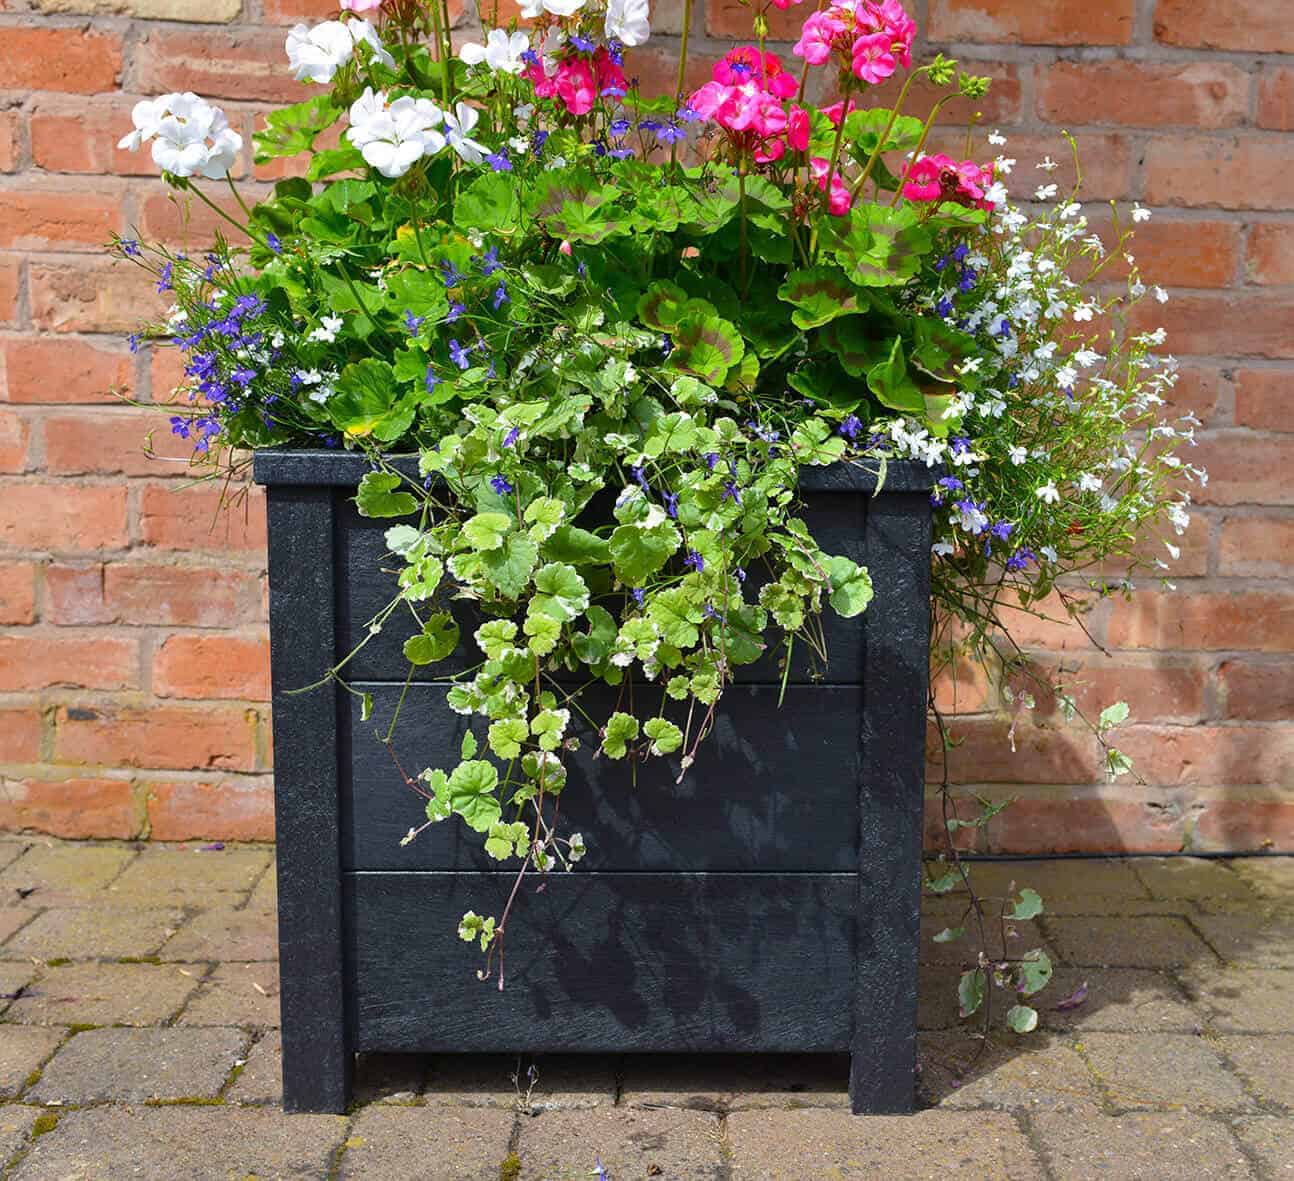 Black Ipstone Garden Planter Made From Recycled Plastic